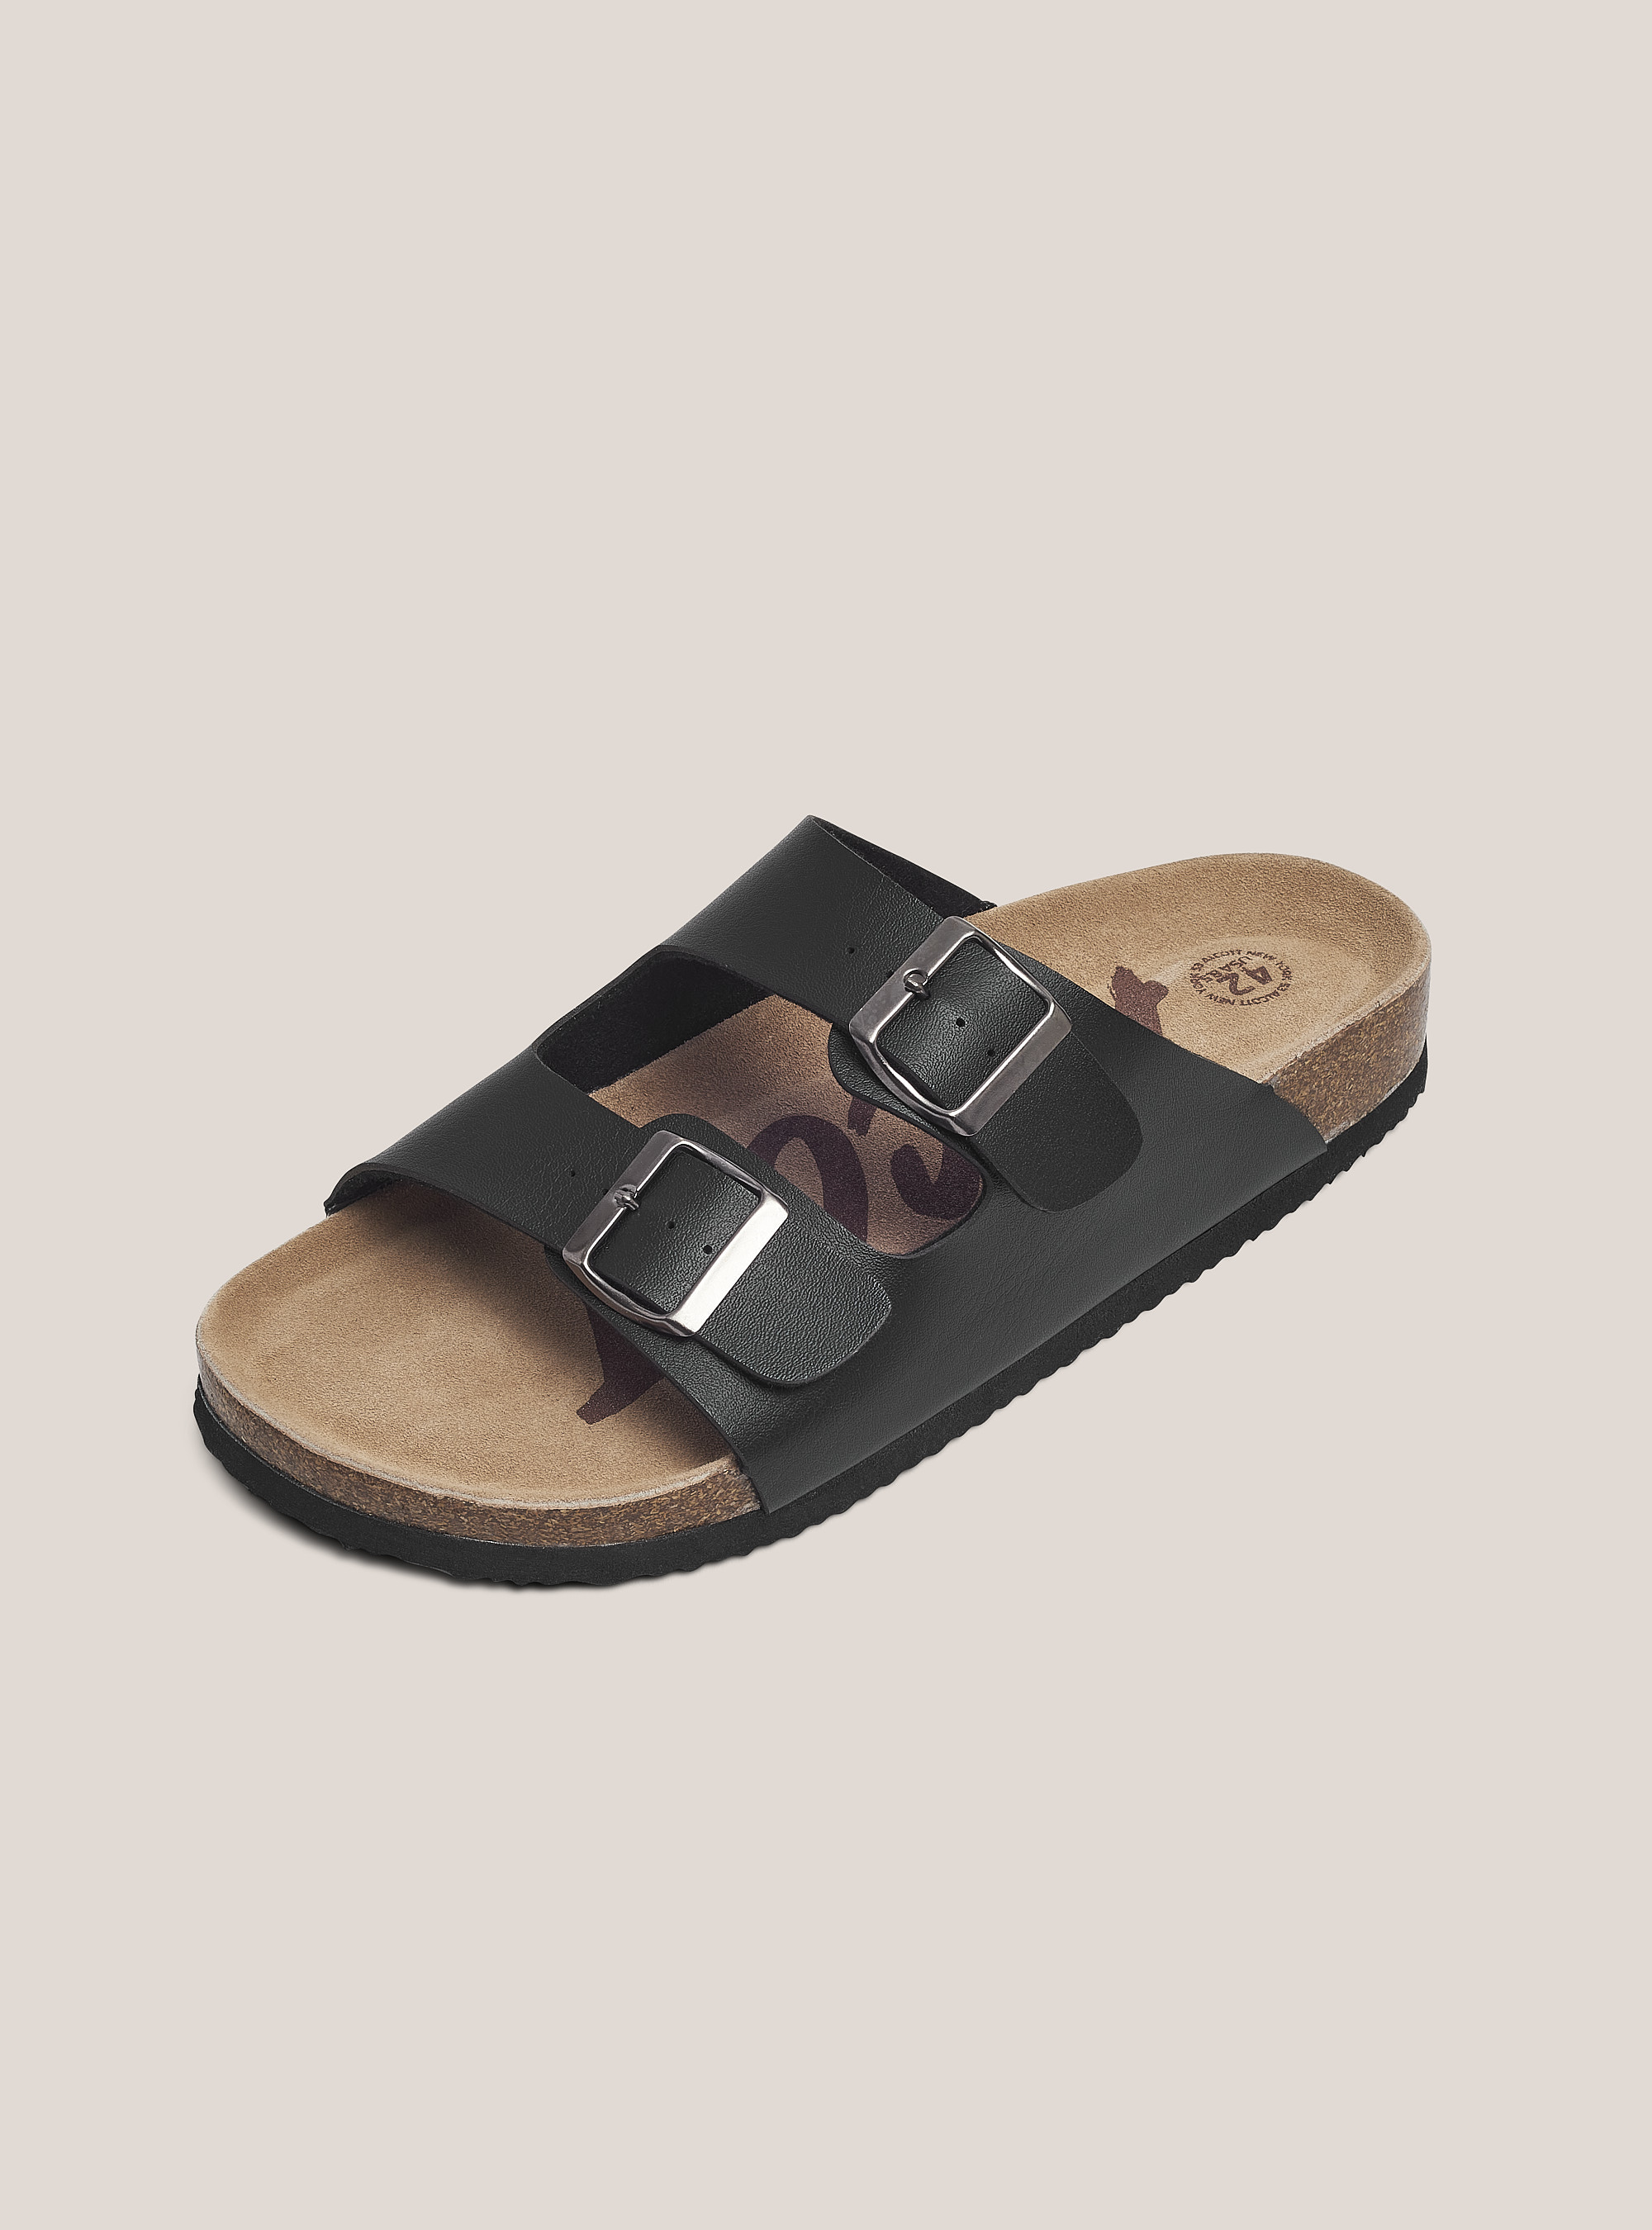 Eco leather sandal with cork sole